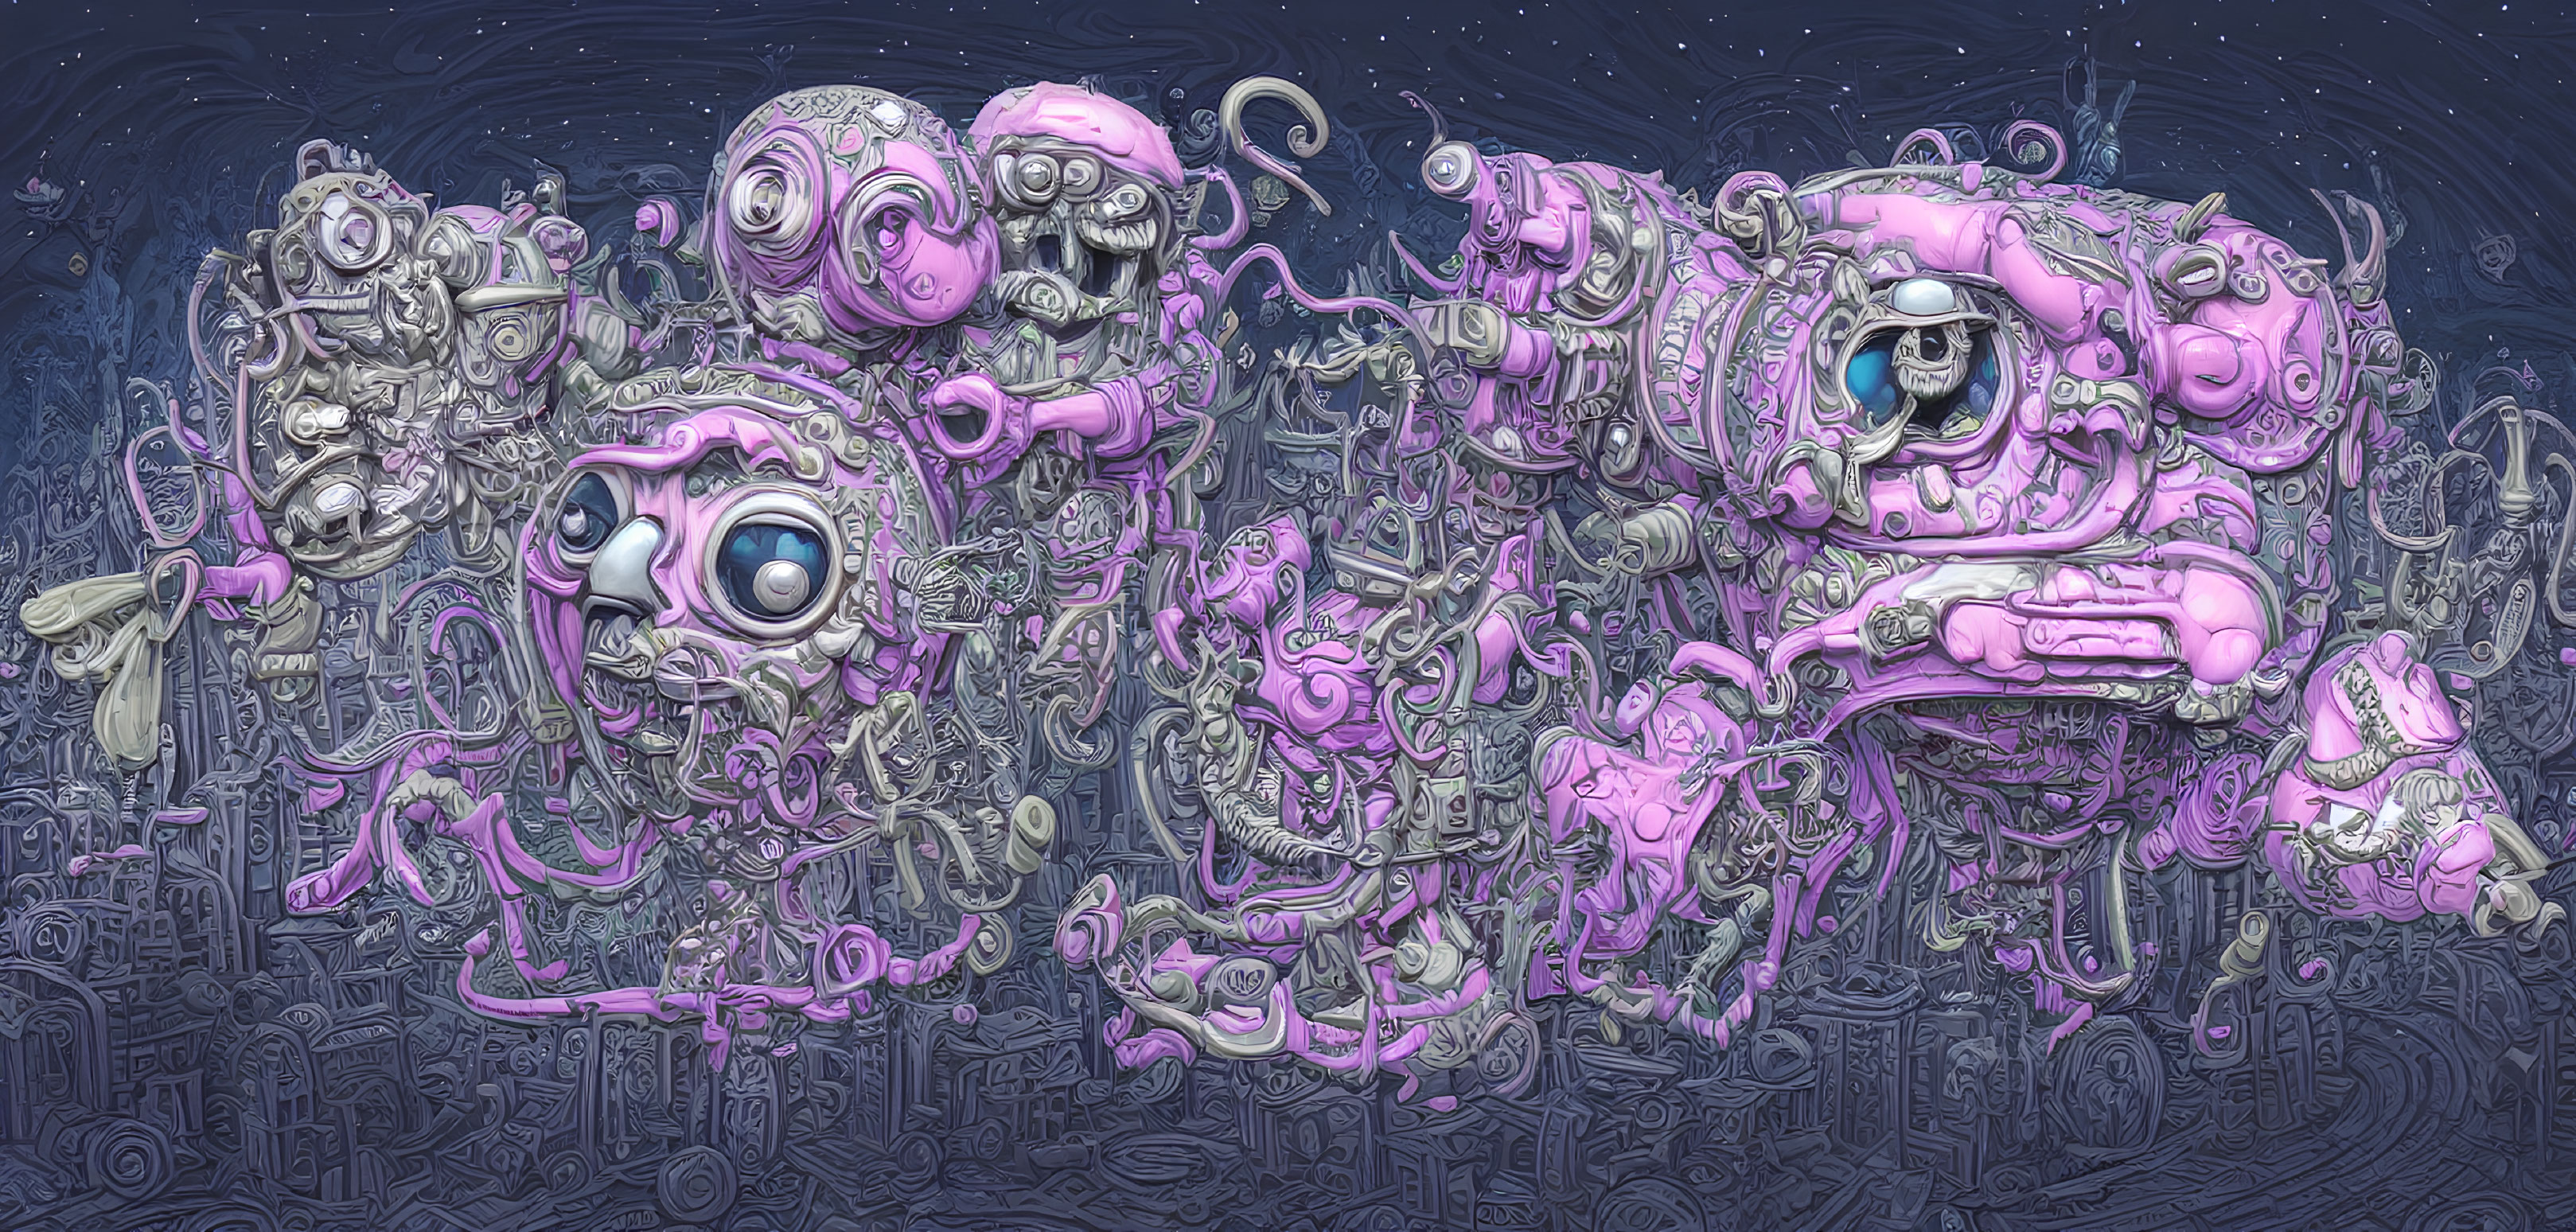 Detailed surreal art: mechanical and organic elements with cartoonish eyes in purple and gray.